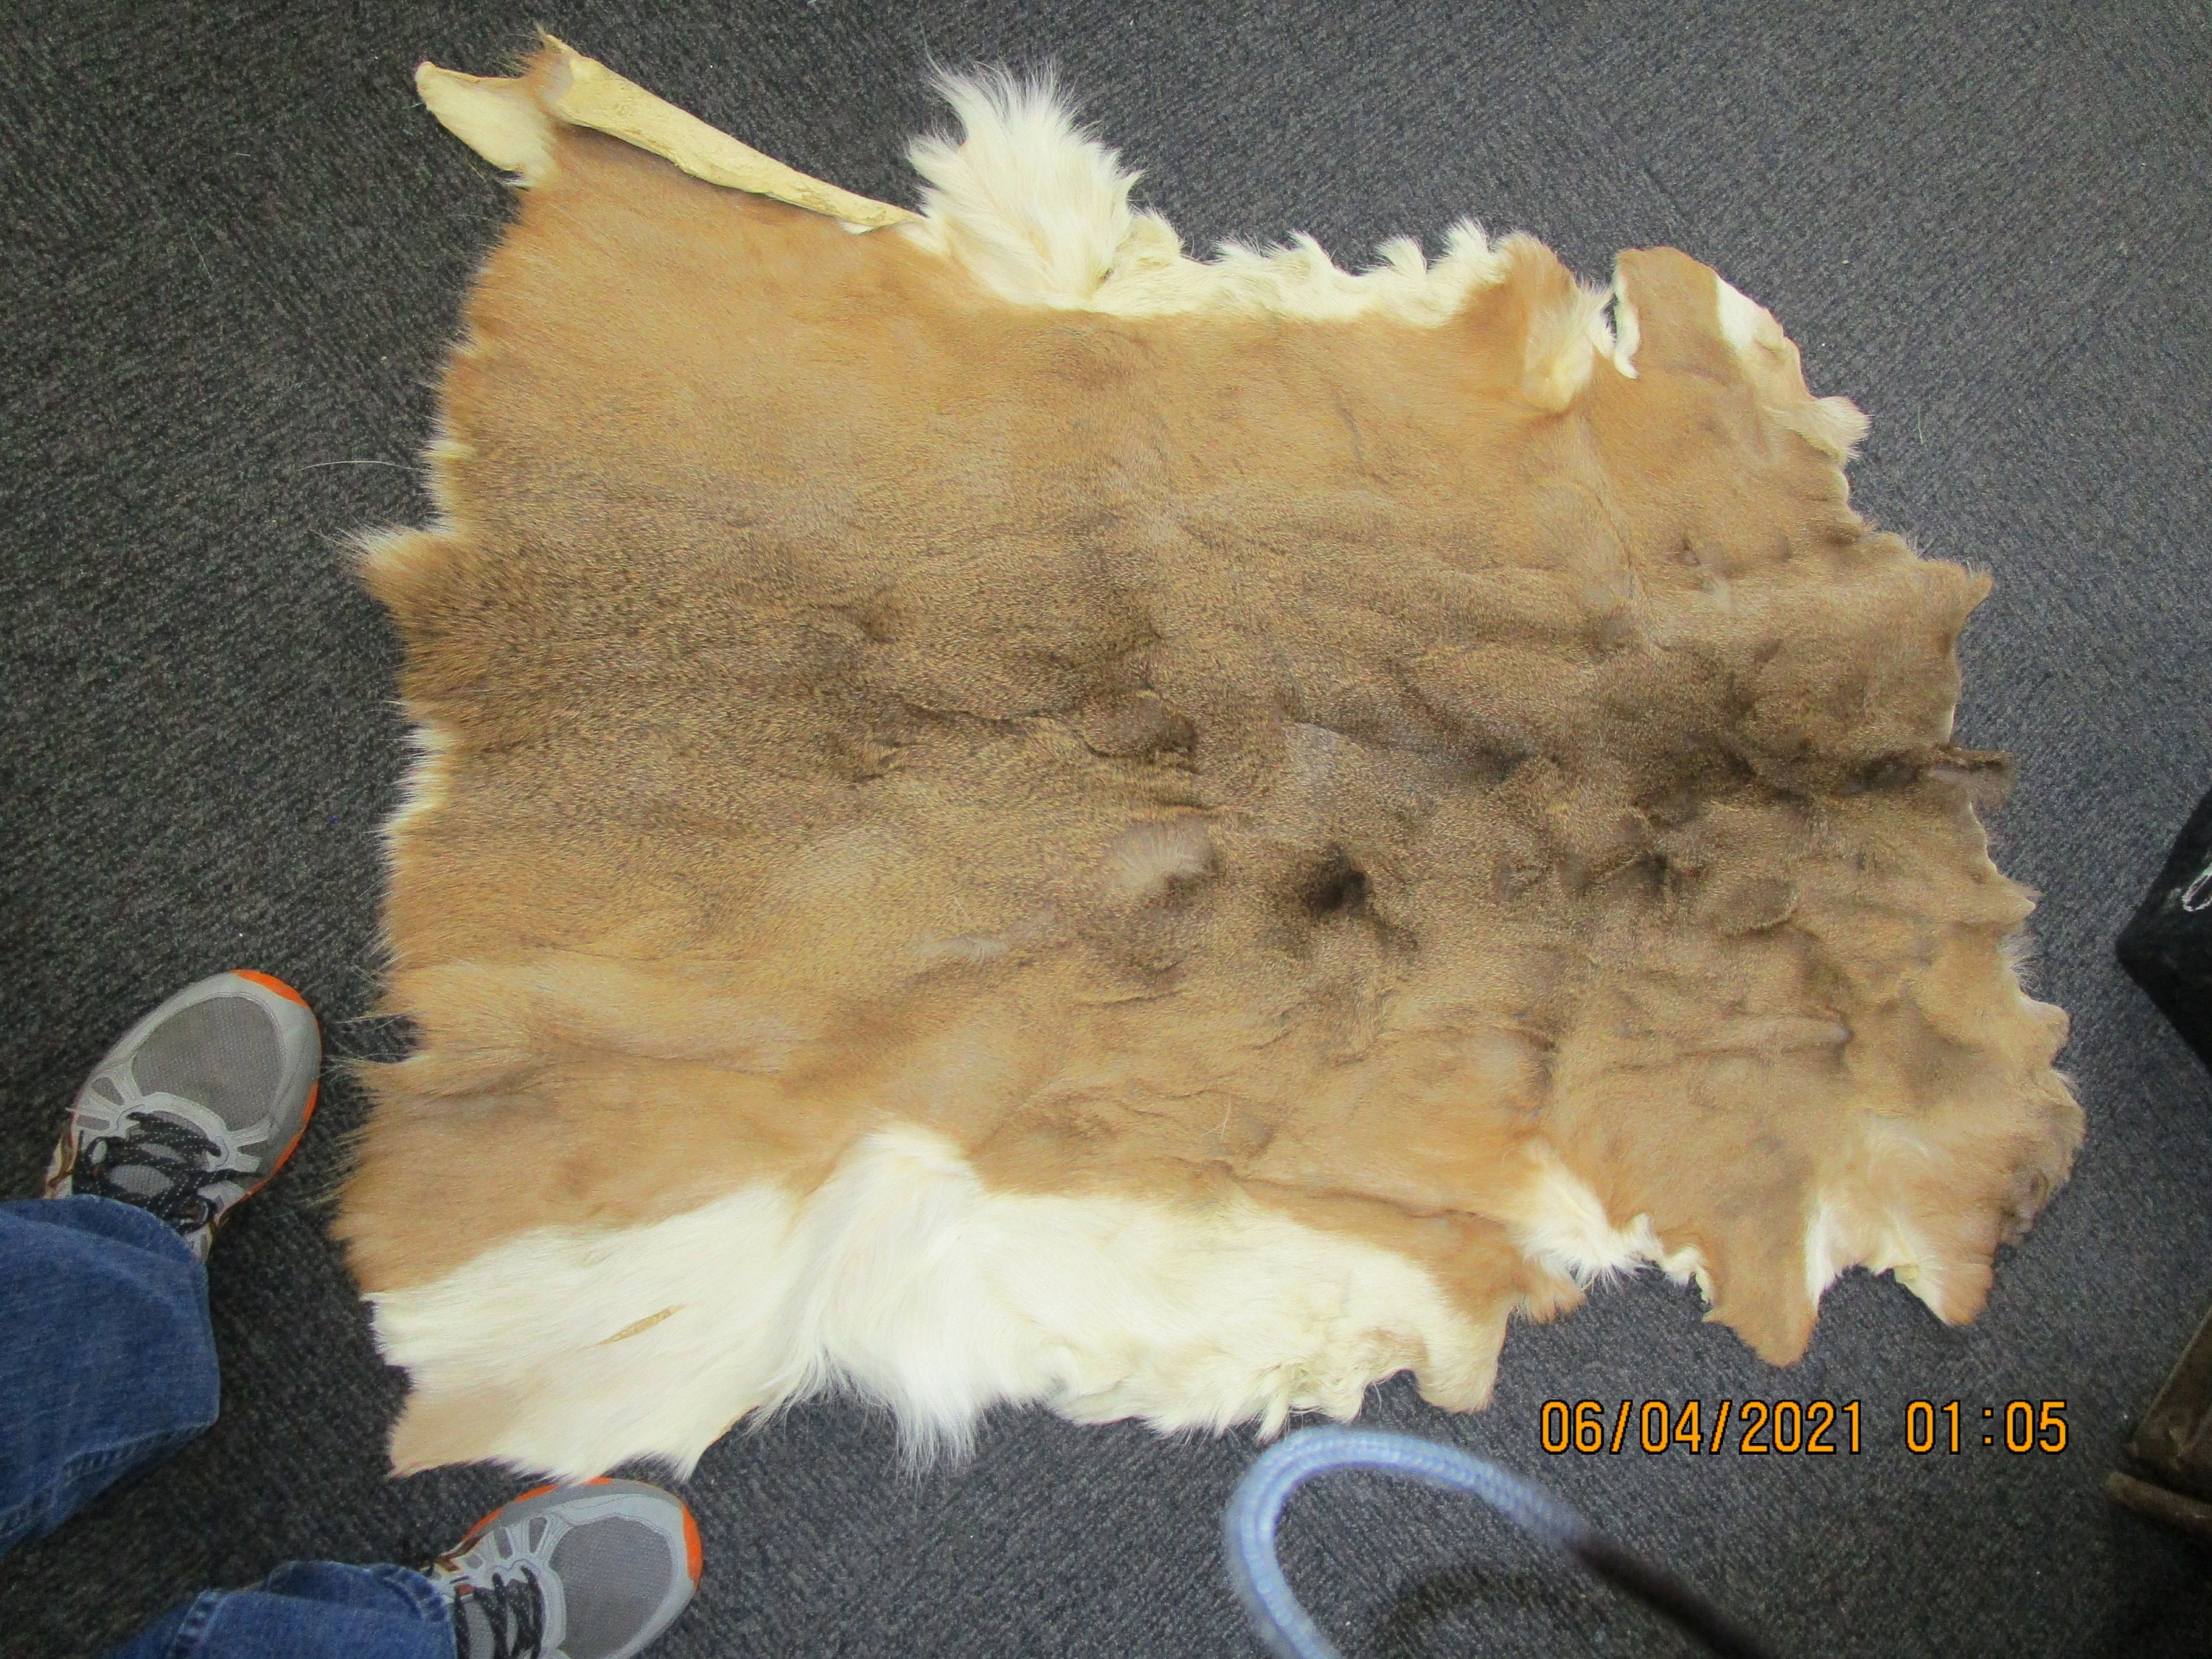 Whitetail Deer Hide With Hair-on